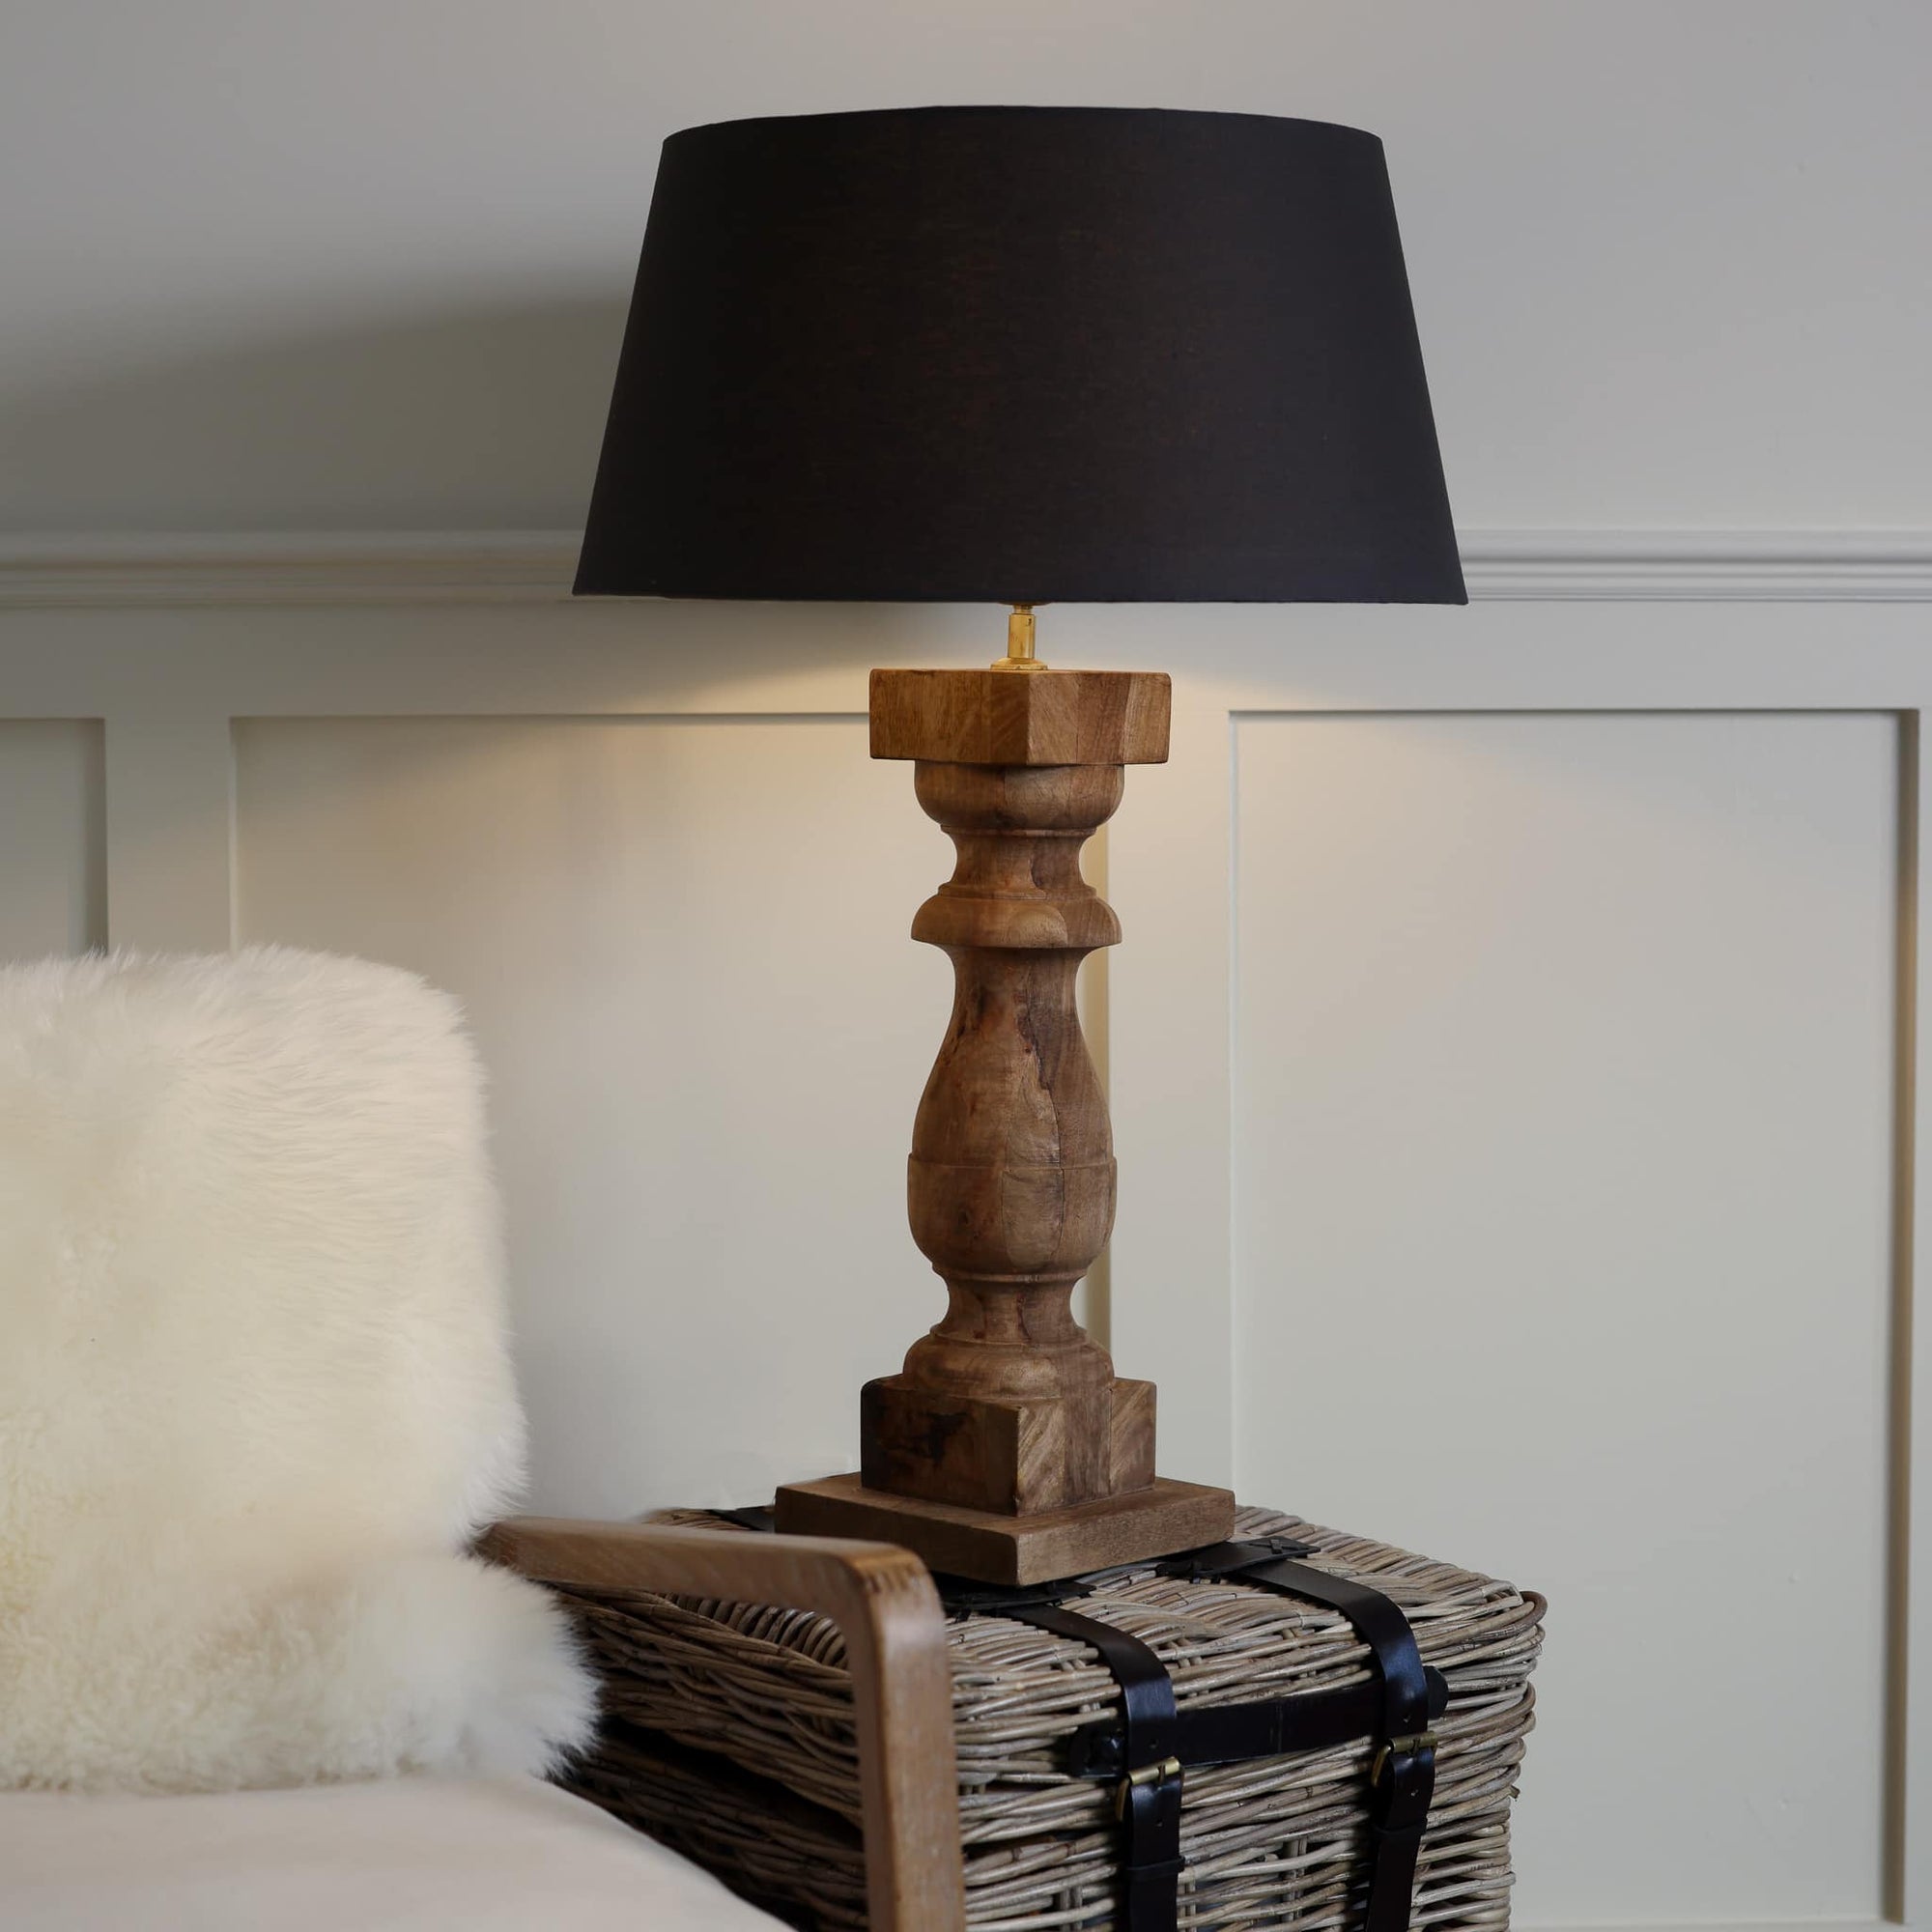 Tall column wooden lamp on side table with black shade, lit.